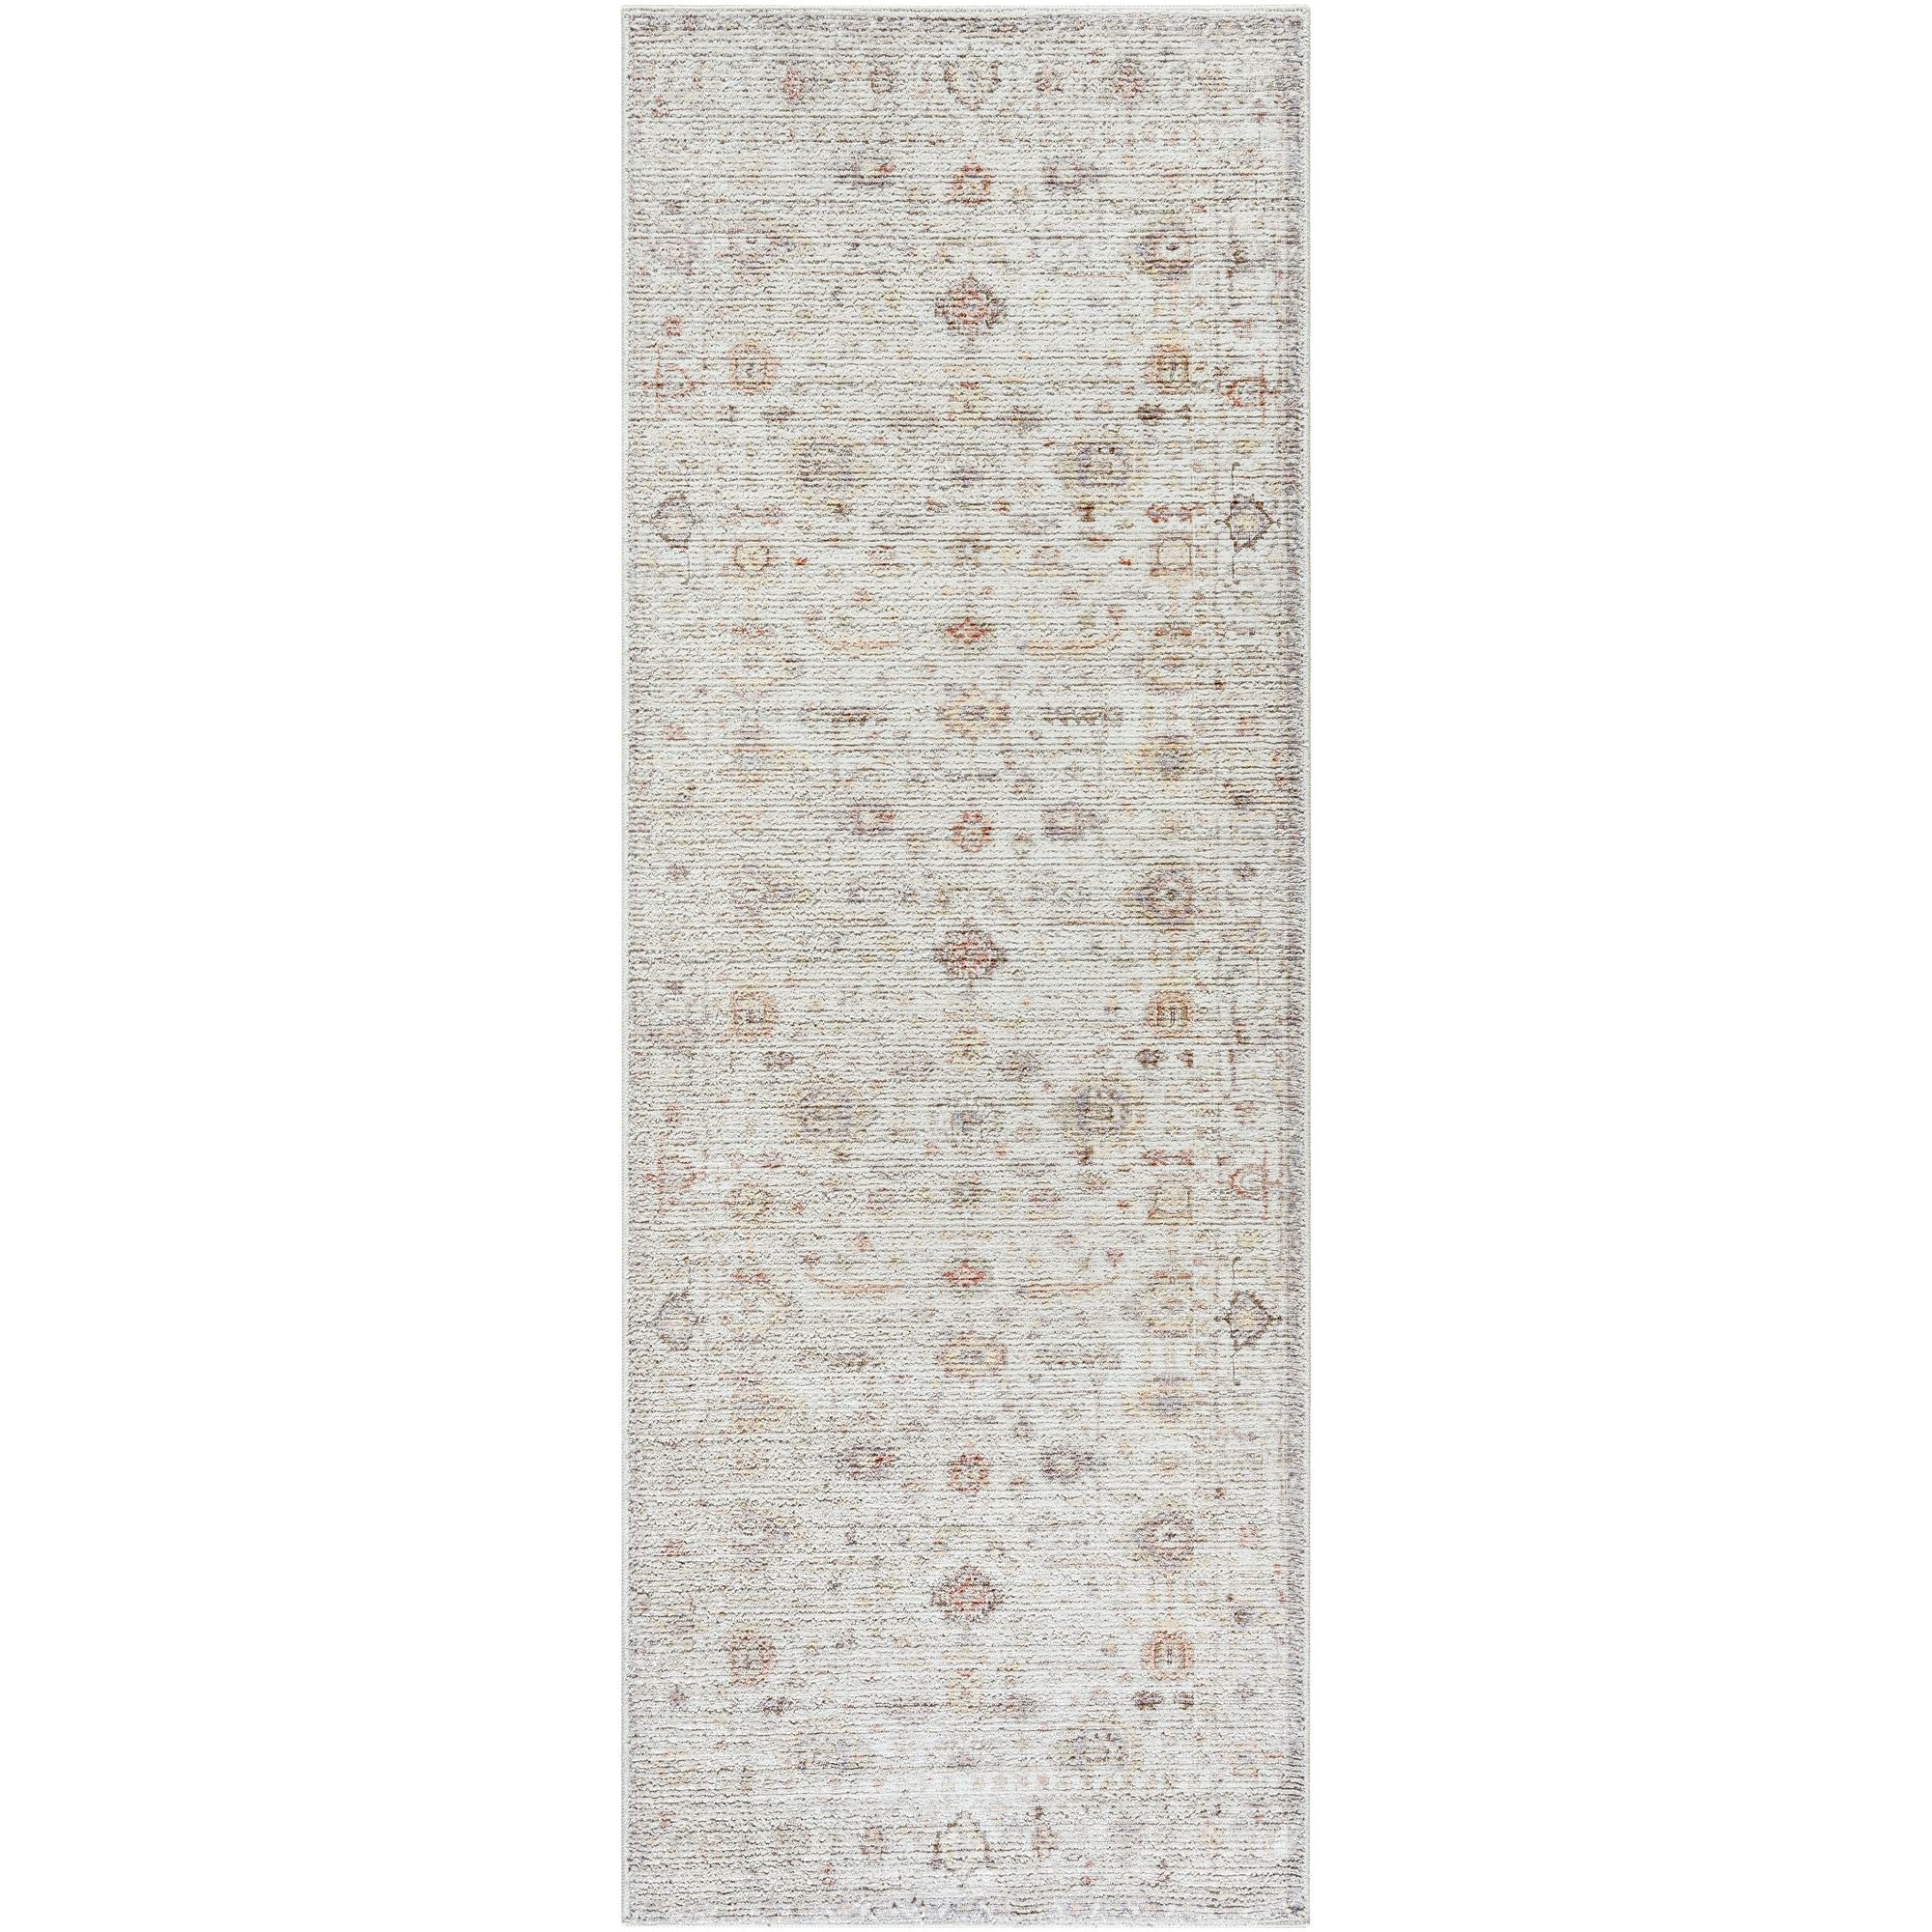 Machine Woven PNWSP-2300 Ivory, Dusty Pink, Mustard, Light Olive, Olive, Rust Rugs #color_ivory, dusty pink, mustard, light olive, olive, rust